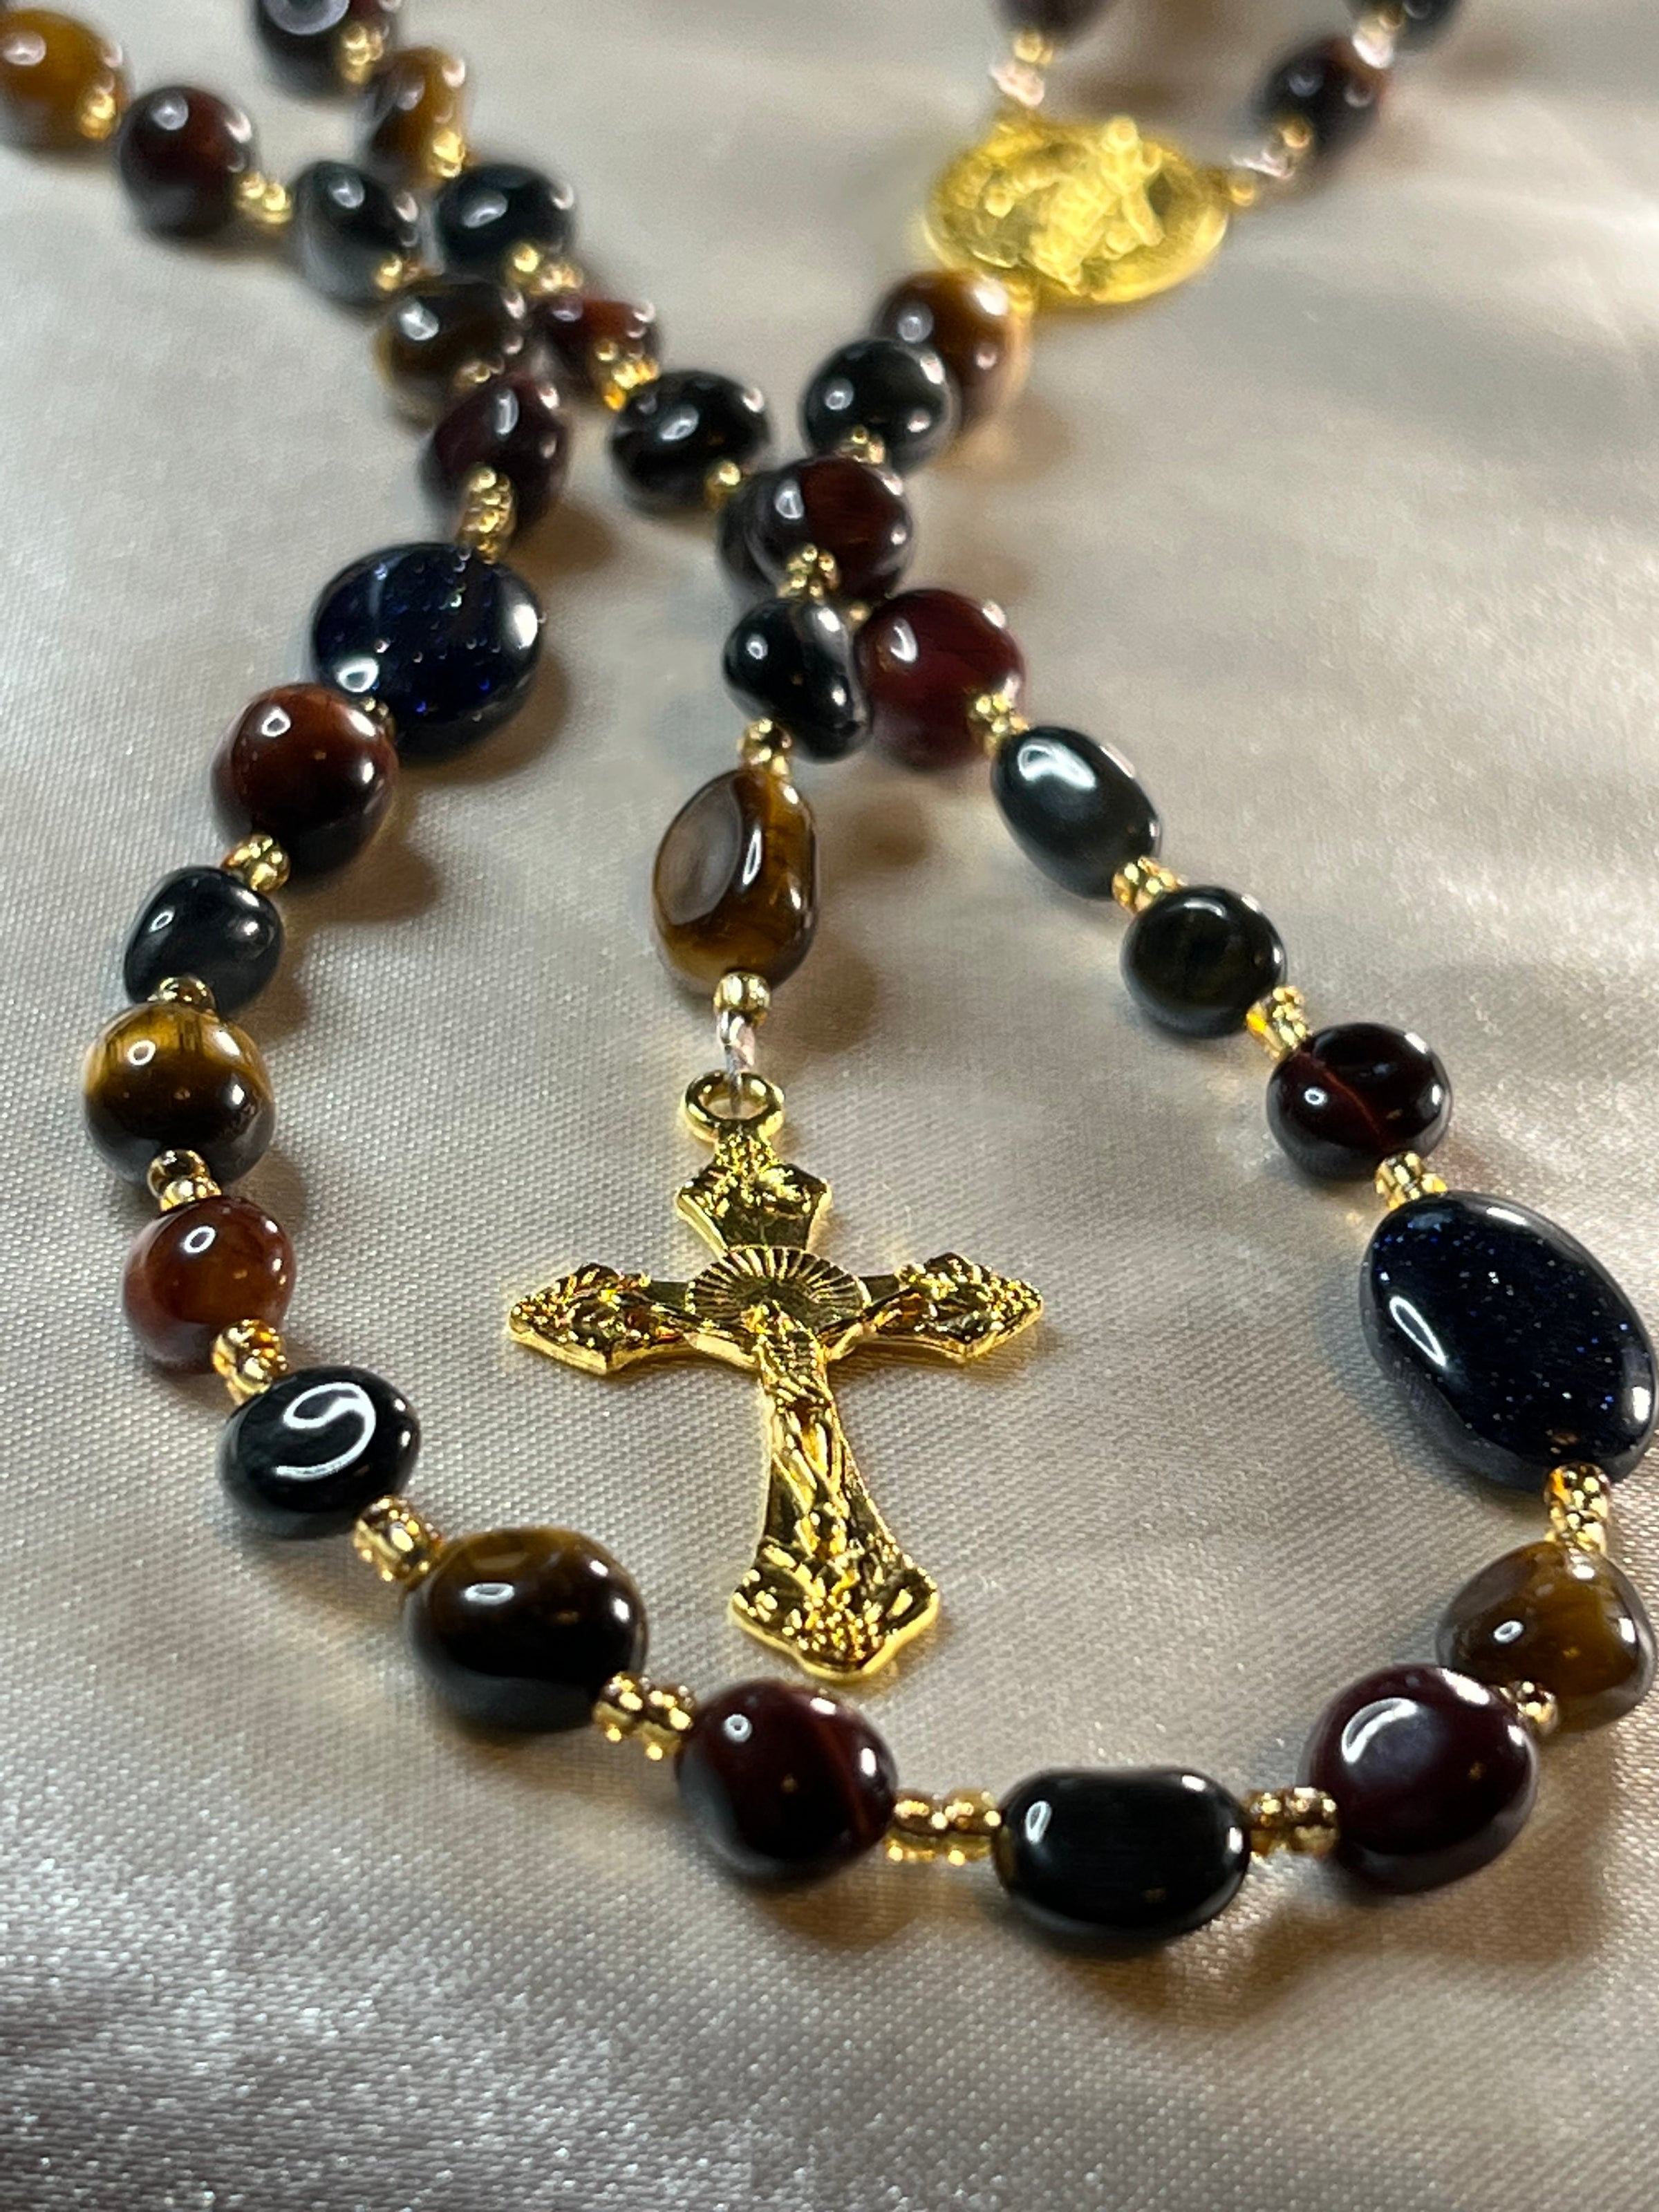 The September Rosary is made with Natural Stones. Each stone feels different going through your fingers.